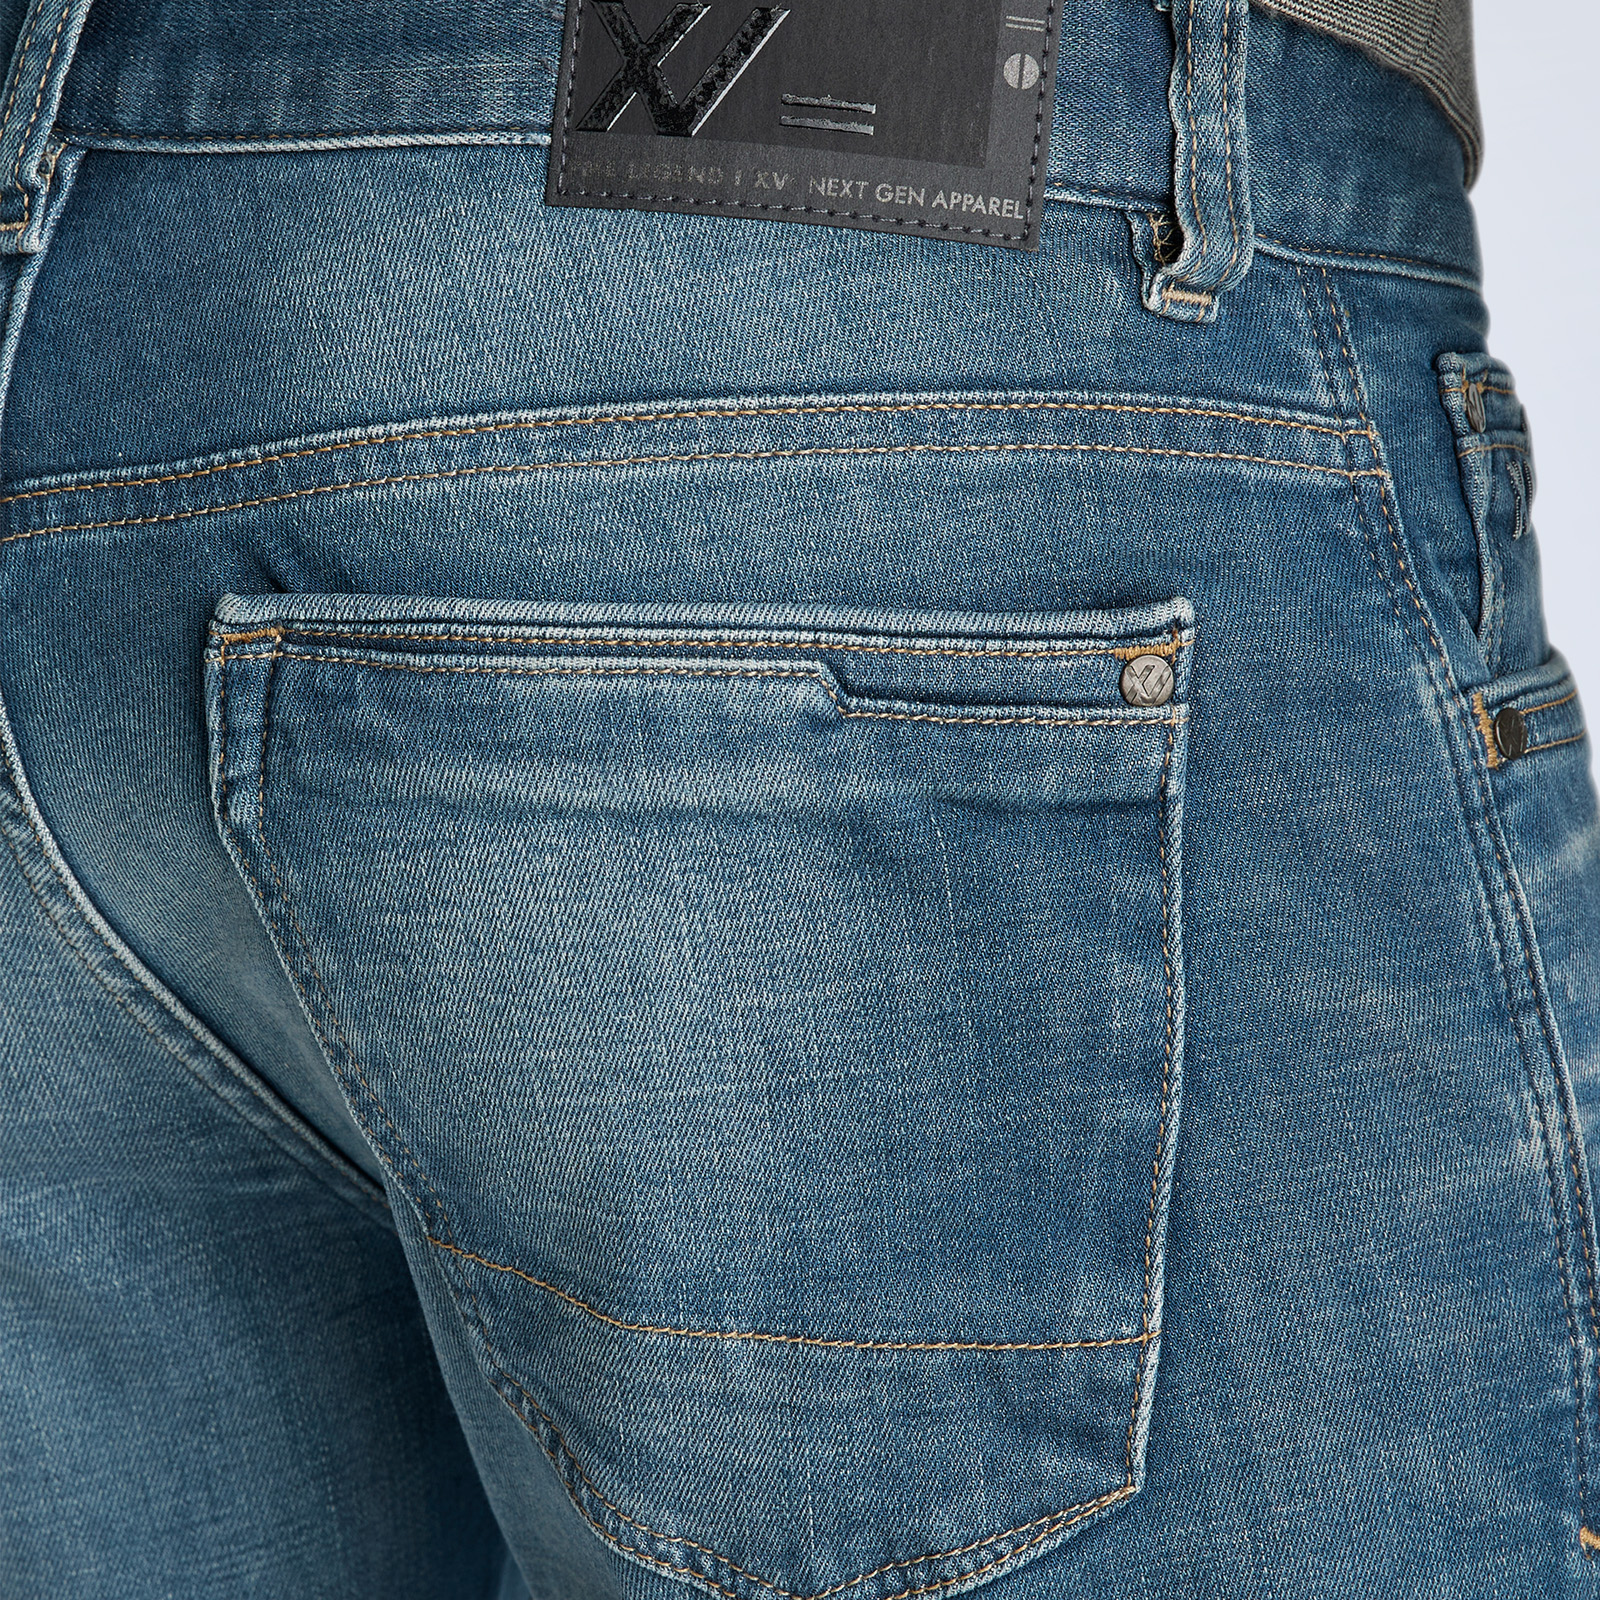 PME XV | Denim Jeans LEGEND and shipping Free | returns